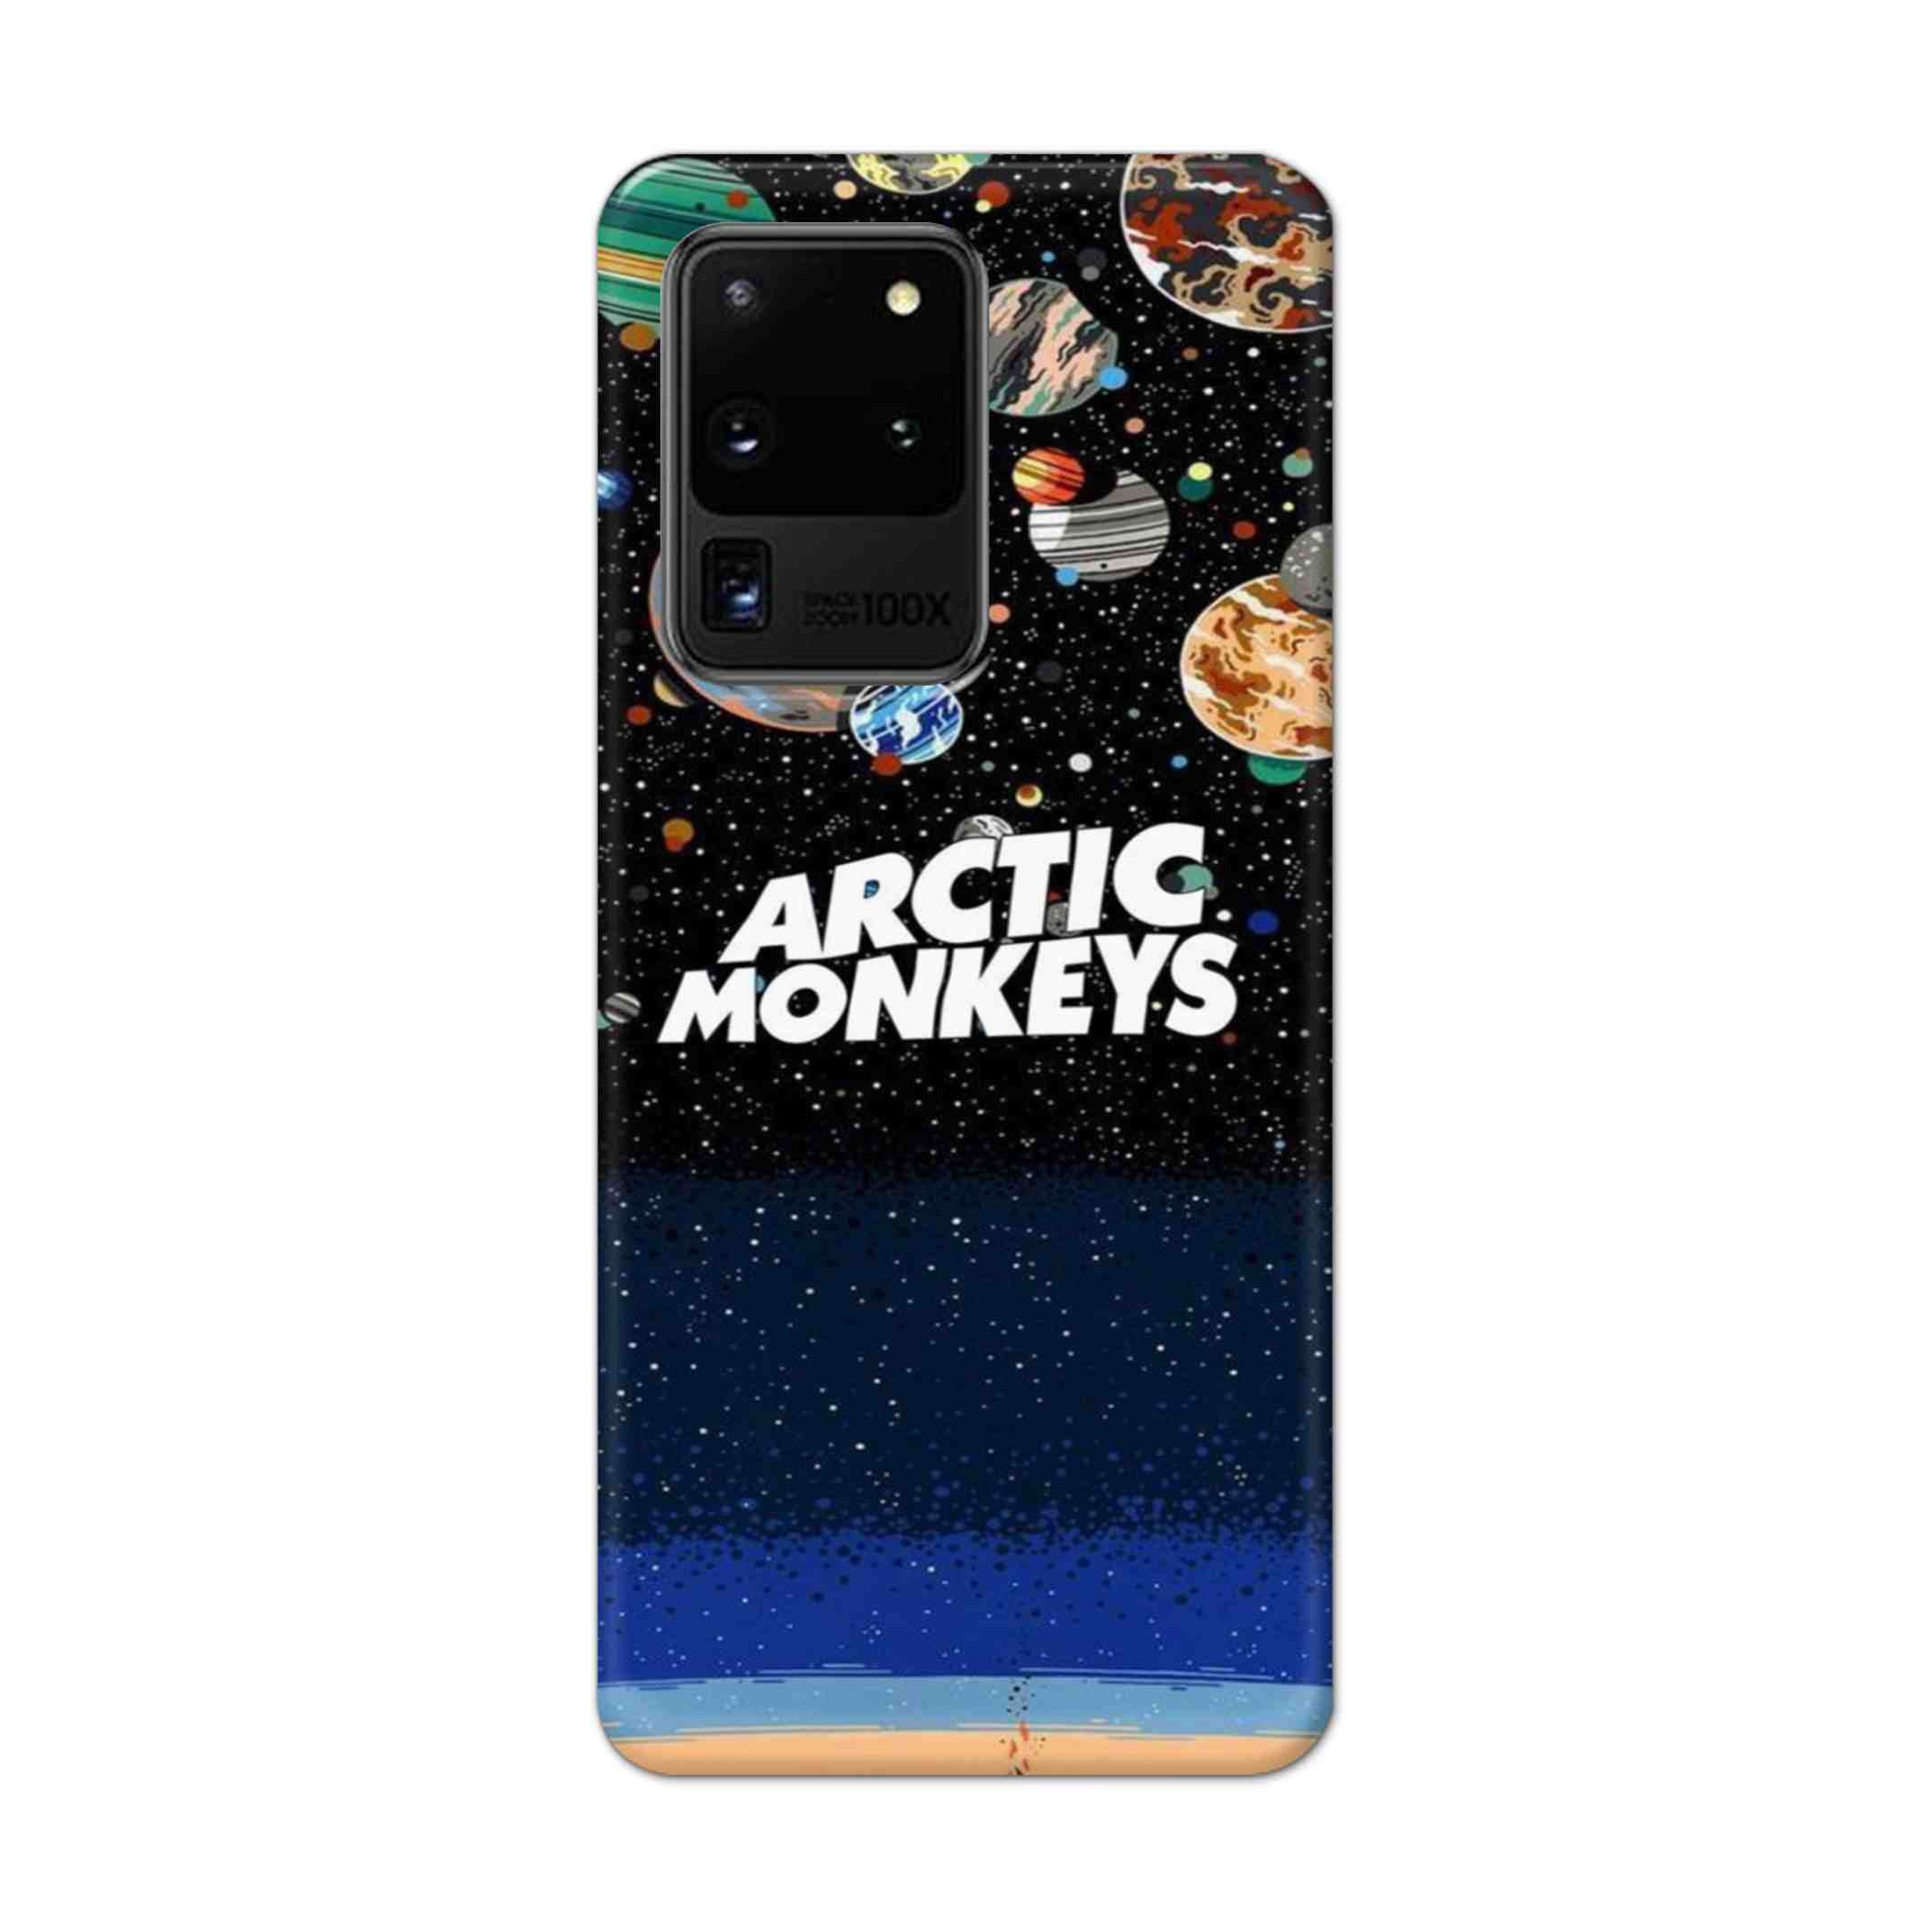 Buy Artic Monkeys Hard Back Mobile Phone Case Cover For Samsung Galaxy S20 Ultra Online